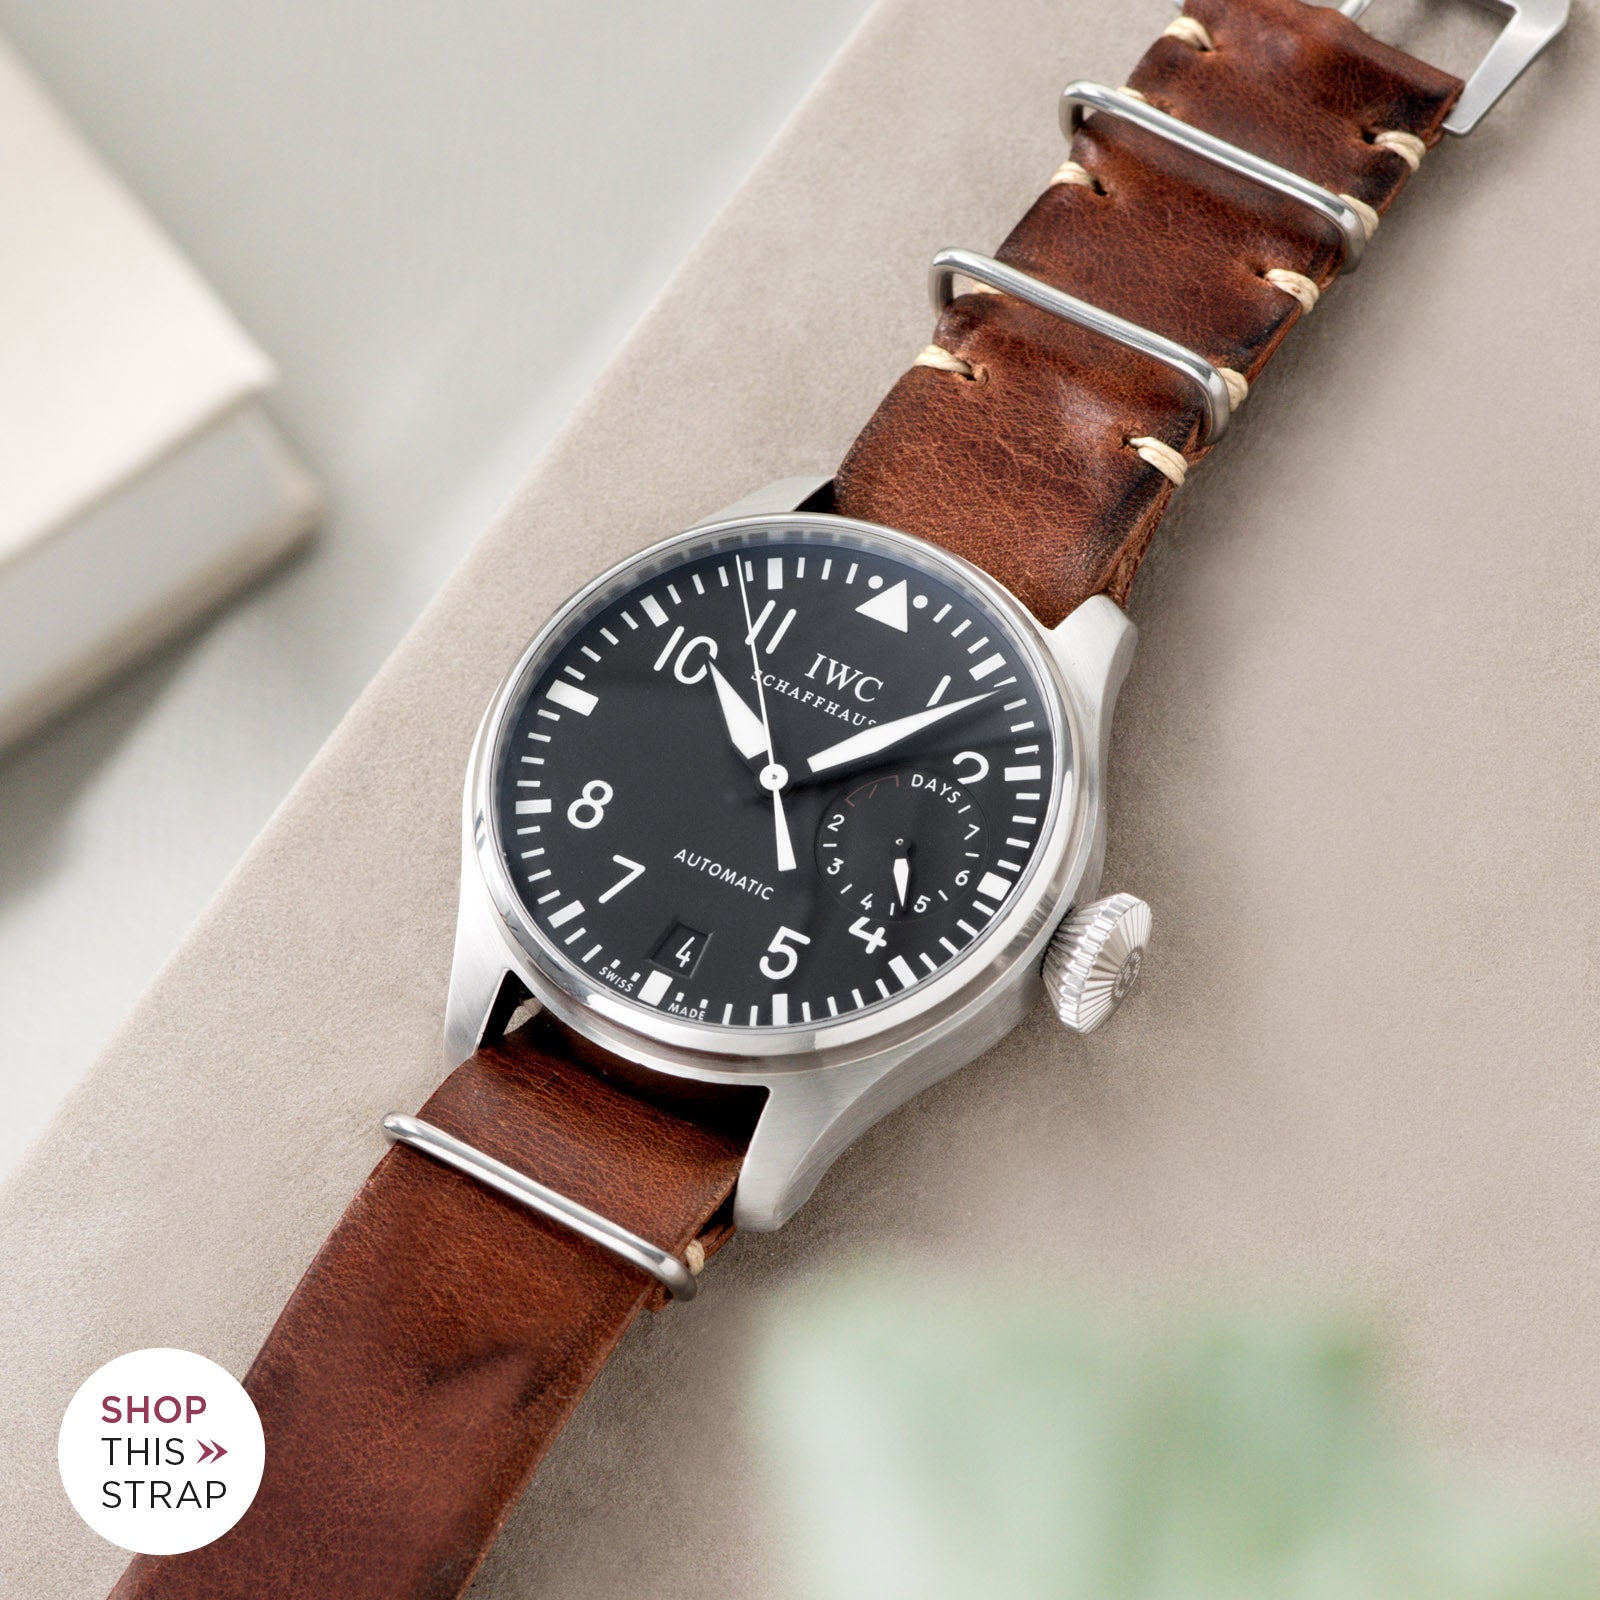 Bulang and Sons_Strap Guide_IWC Big Pilot Ref 5004_Siena Brown Nato Leather Watch Strap